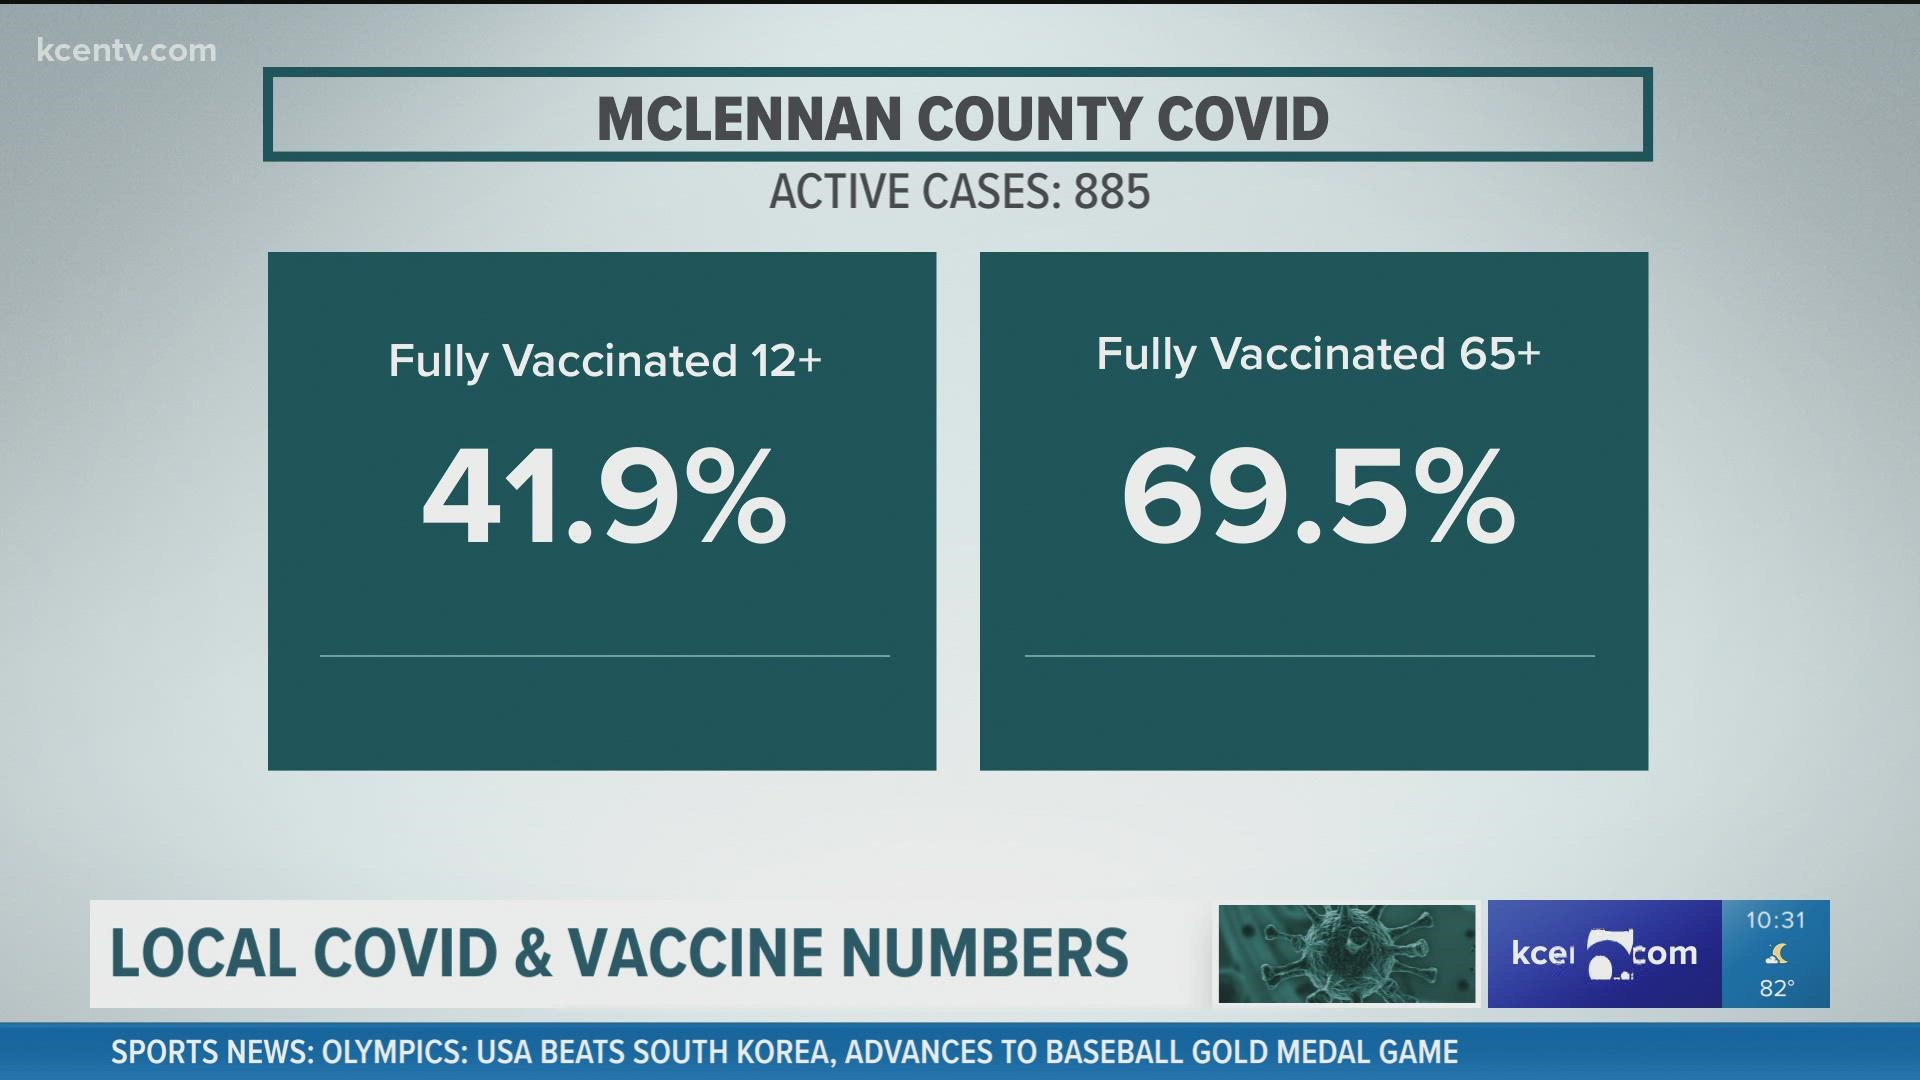 The health department says this is due to high spread, hospitalizations and severe outcomes among the unvaccinated.